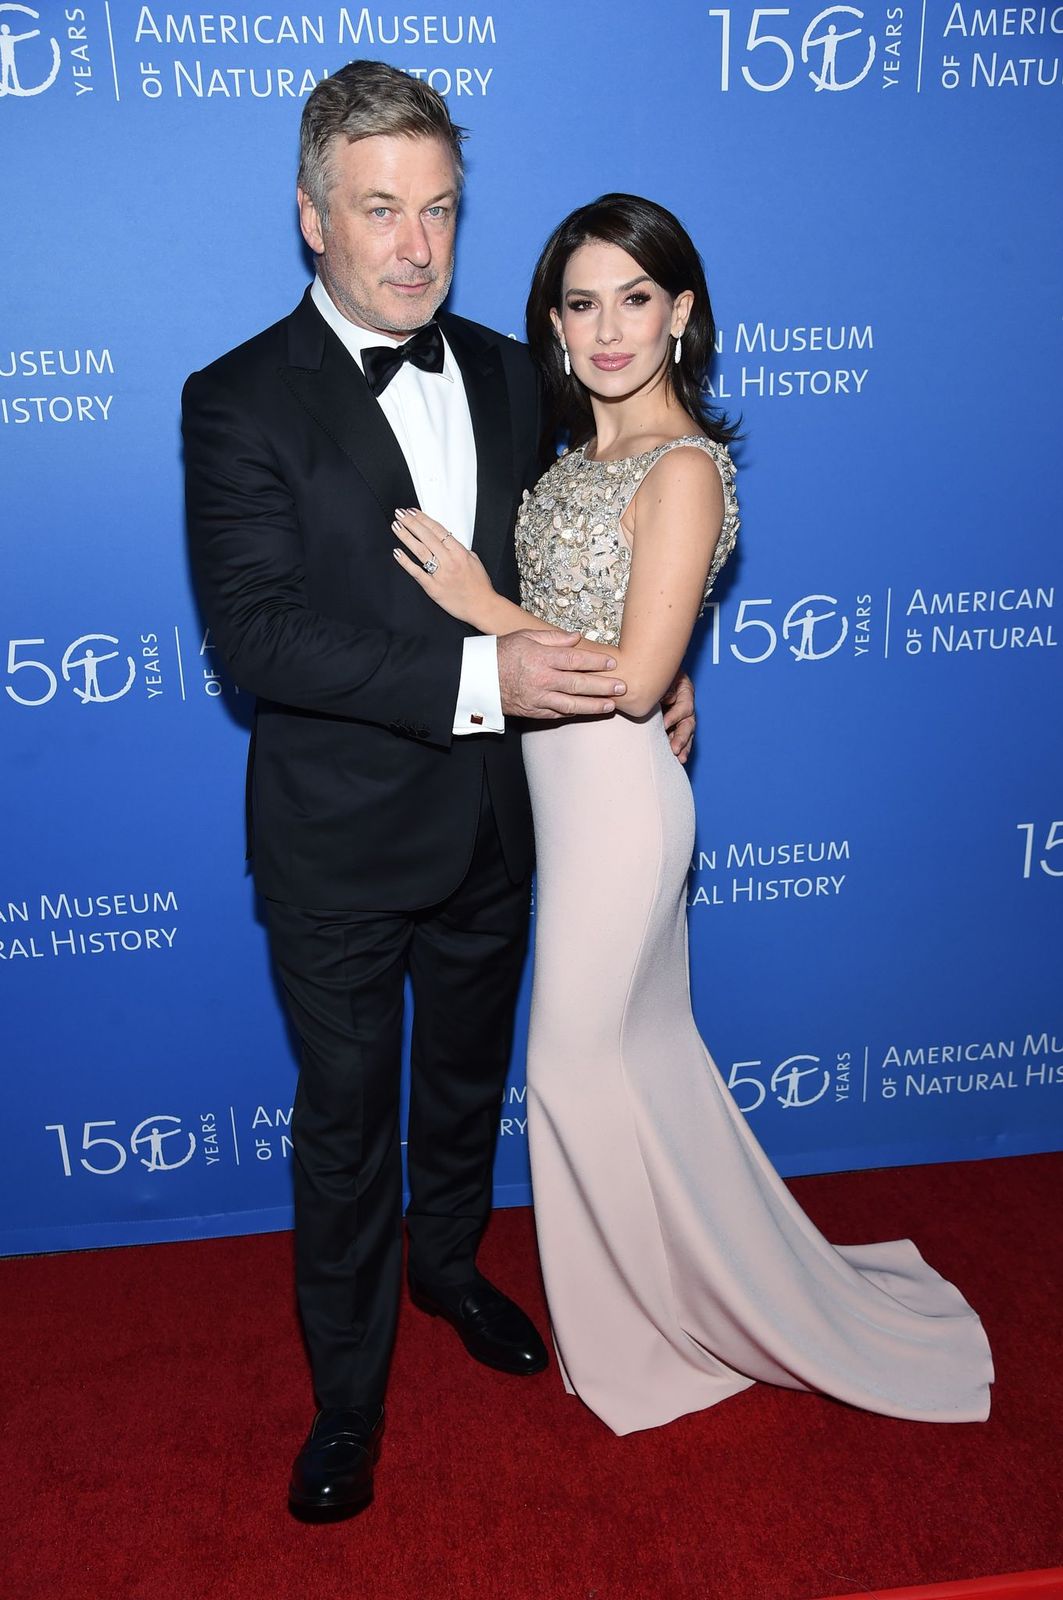 Alec and Hilaria Baldwin at the American Museum Of Natural History Gala on November 21, 2019, in New York City | Photo: Jamie McCarthy/Getty Images